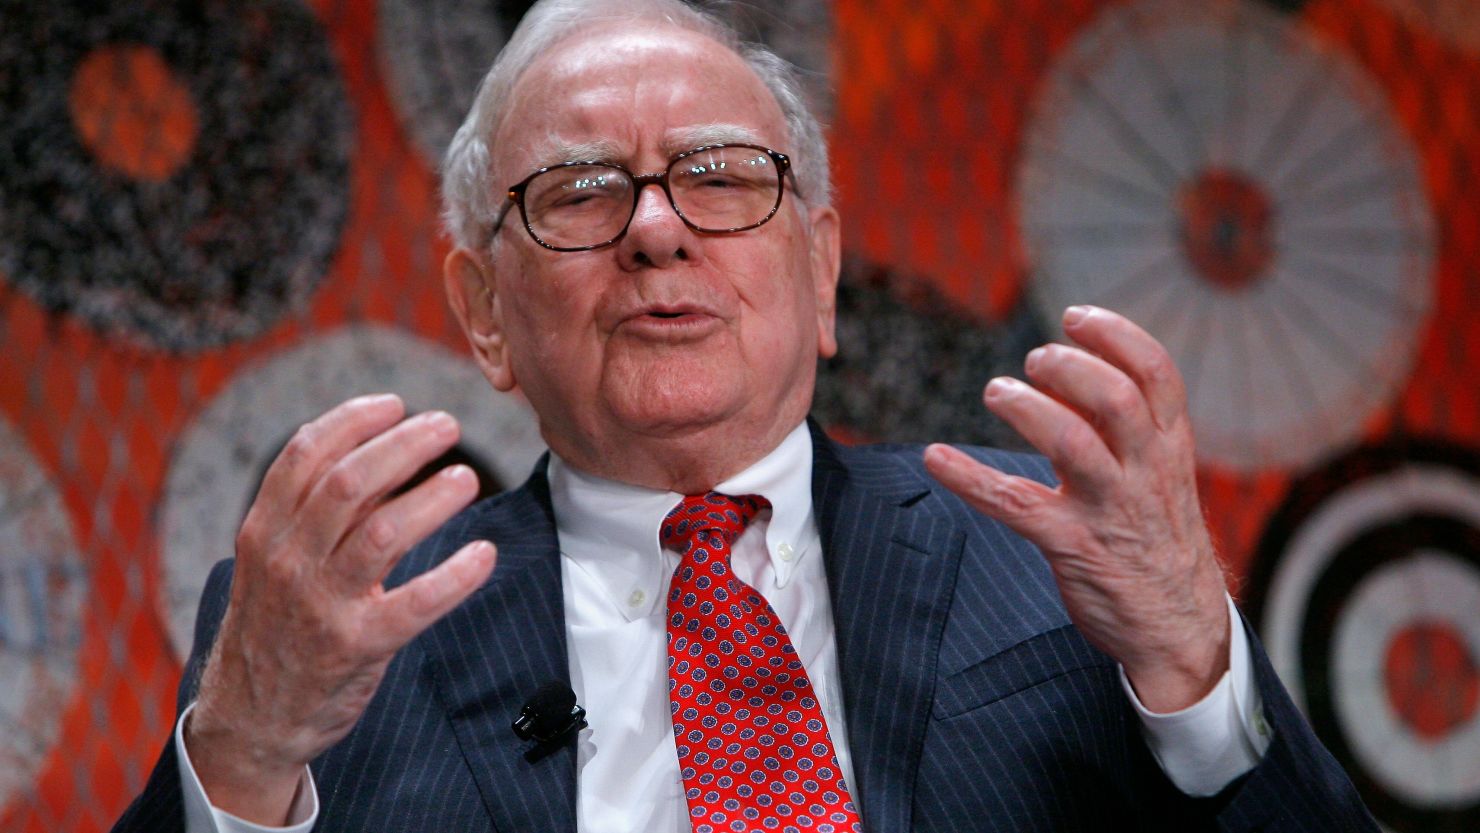 Is it time for investors to follow Warren Buffett's dictim: "Be fearful when others are greedy and greedy when others are fearful"?